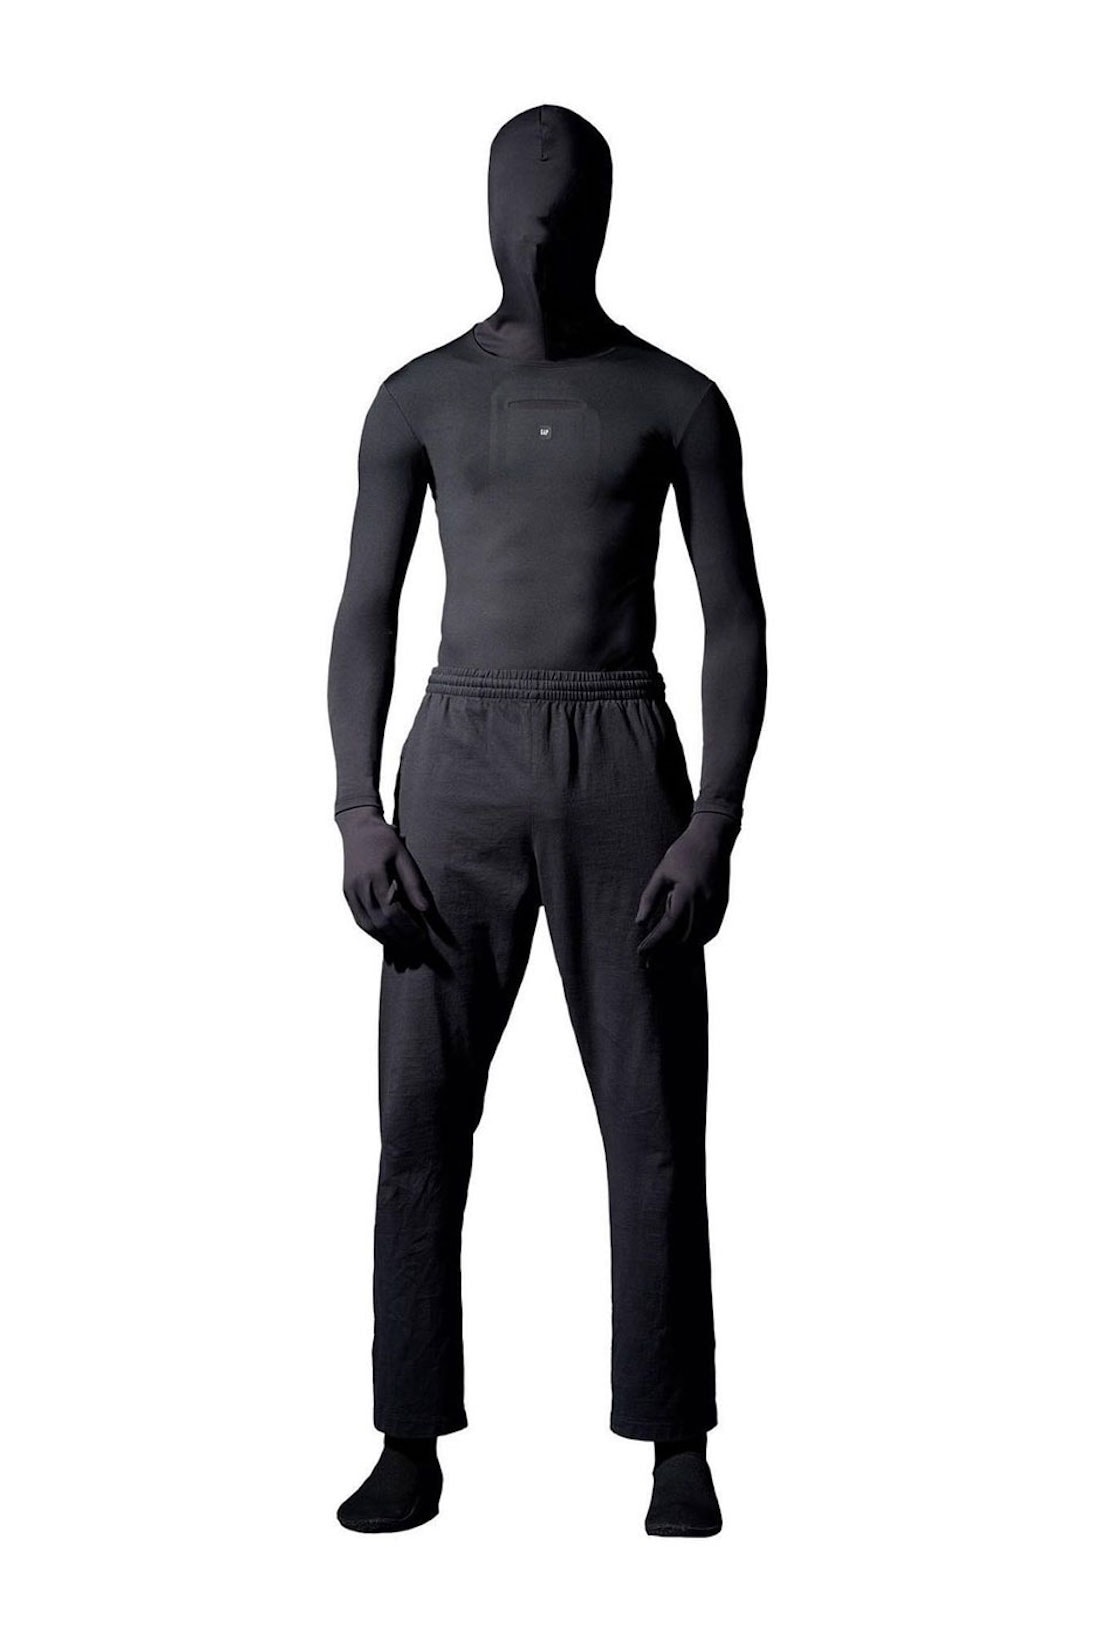  YEEZY Gap Engineered by Balenciaga Collection 2 Kanye West Demna Collaboration Hoodies Caps Pants